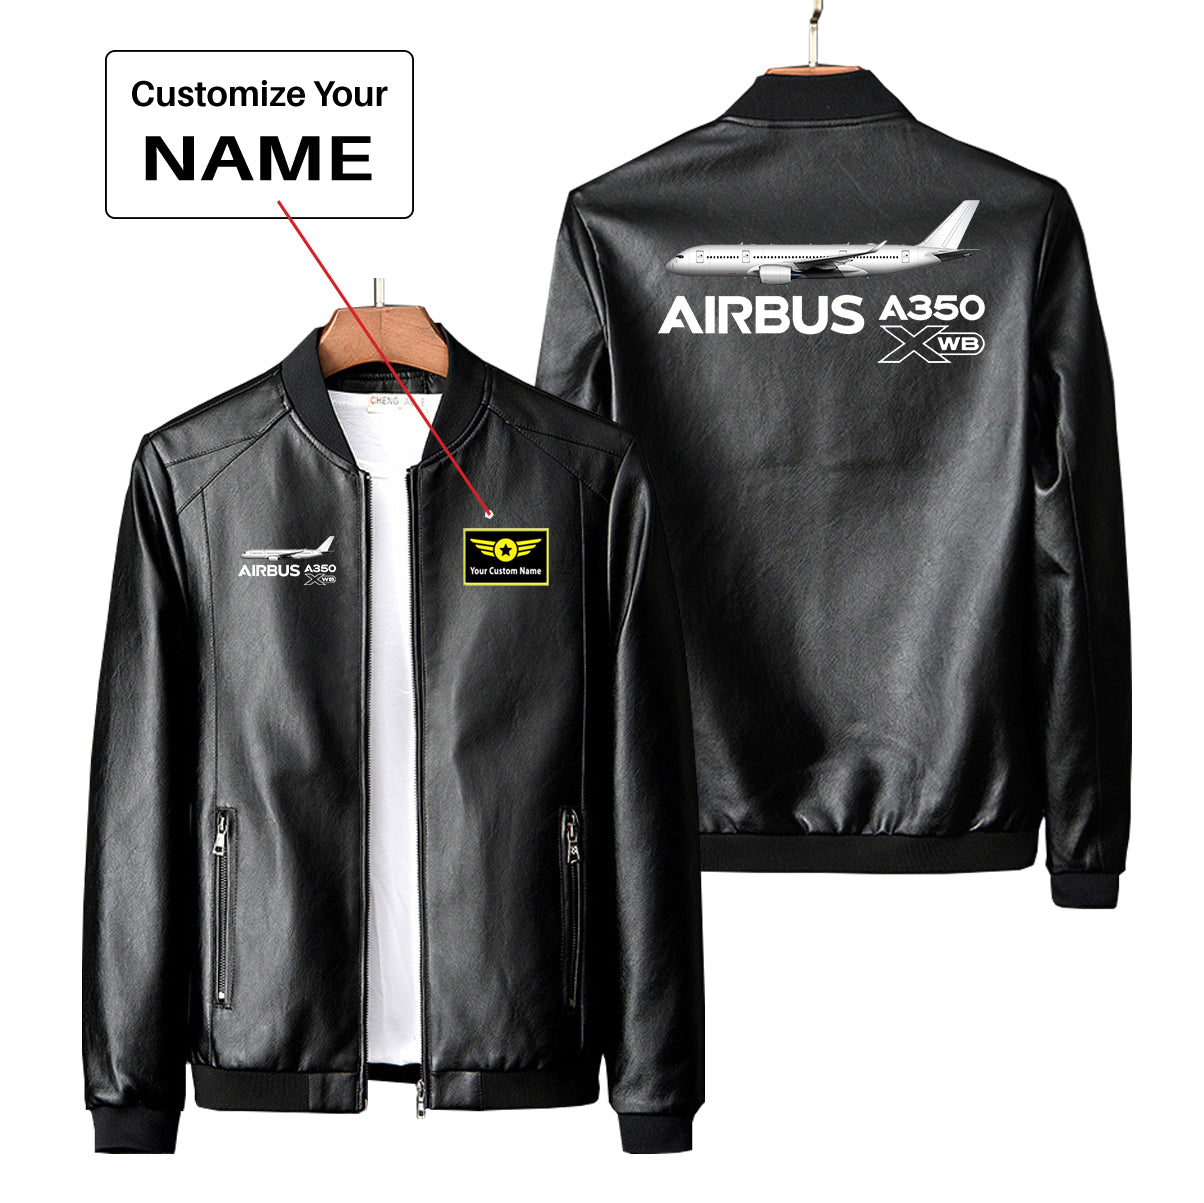 The Airbus A350 WXB Designed PU Leather Jackets